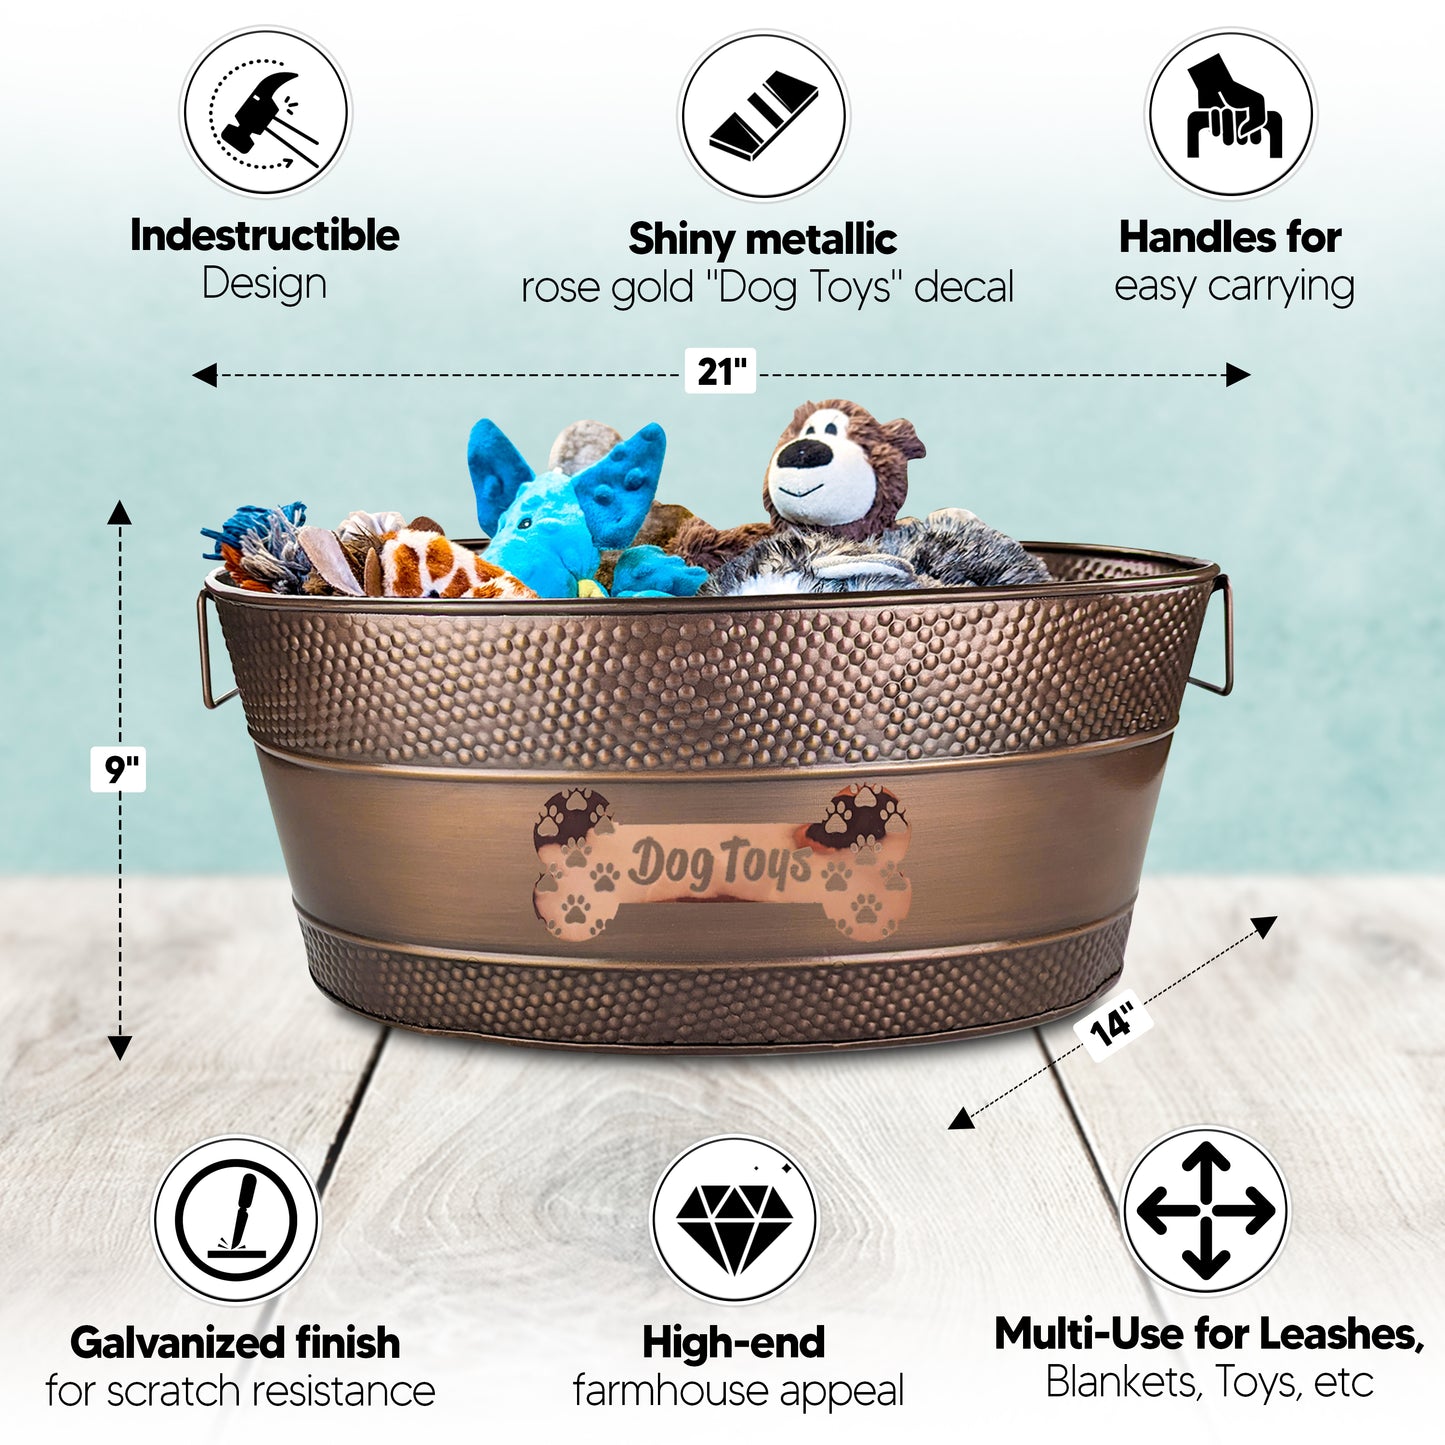 personalized dog bin.  indestructible with handles for easy carrying.  galvanized finish. scratch resistant for leashes, blankets and toys storage.